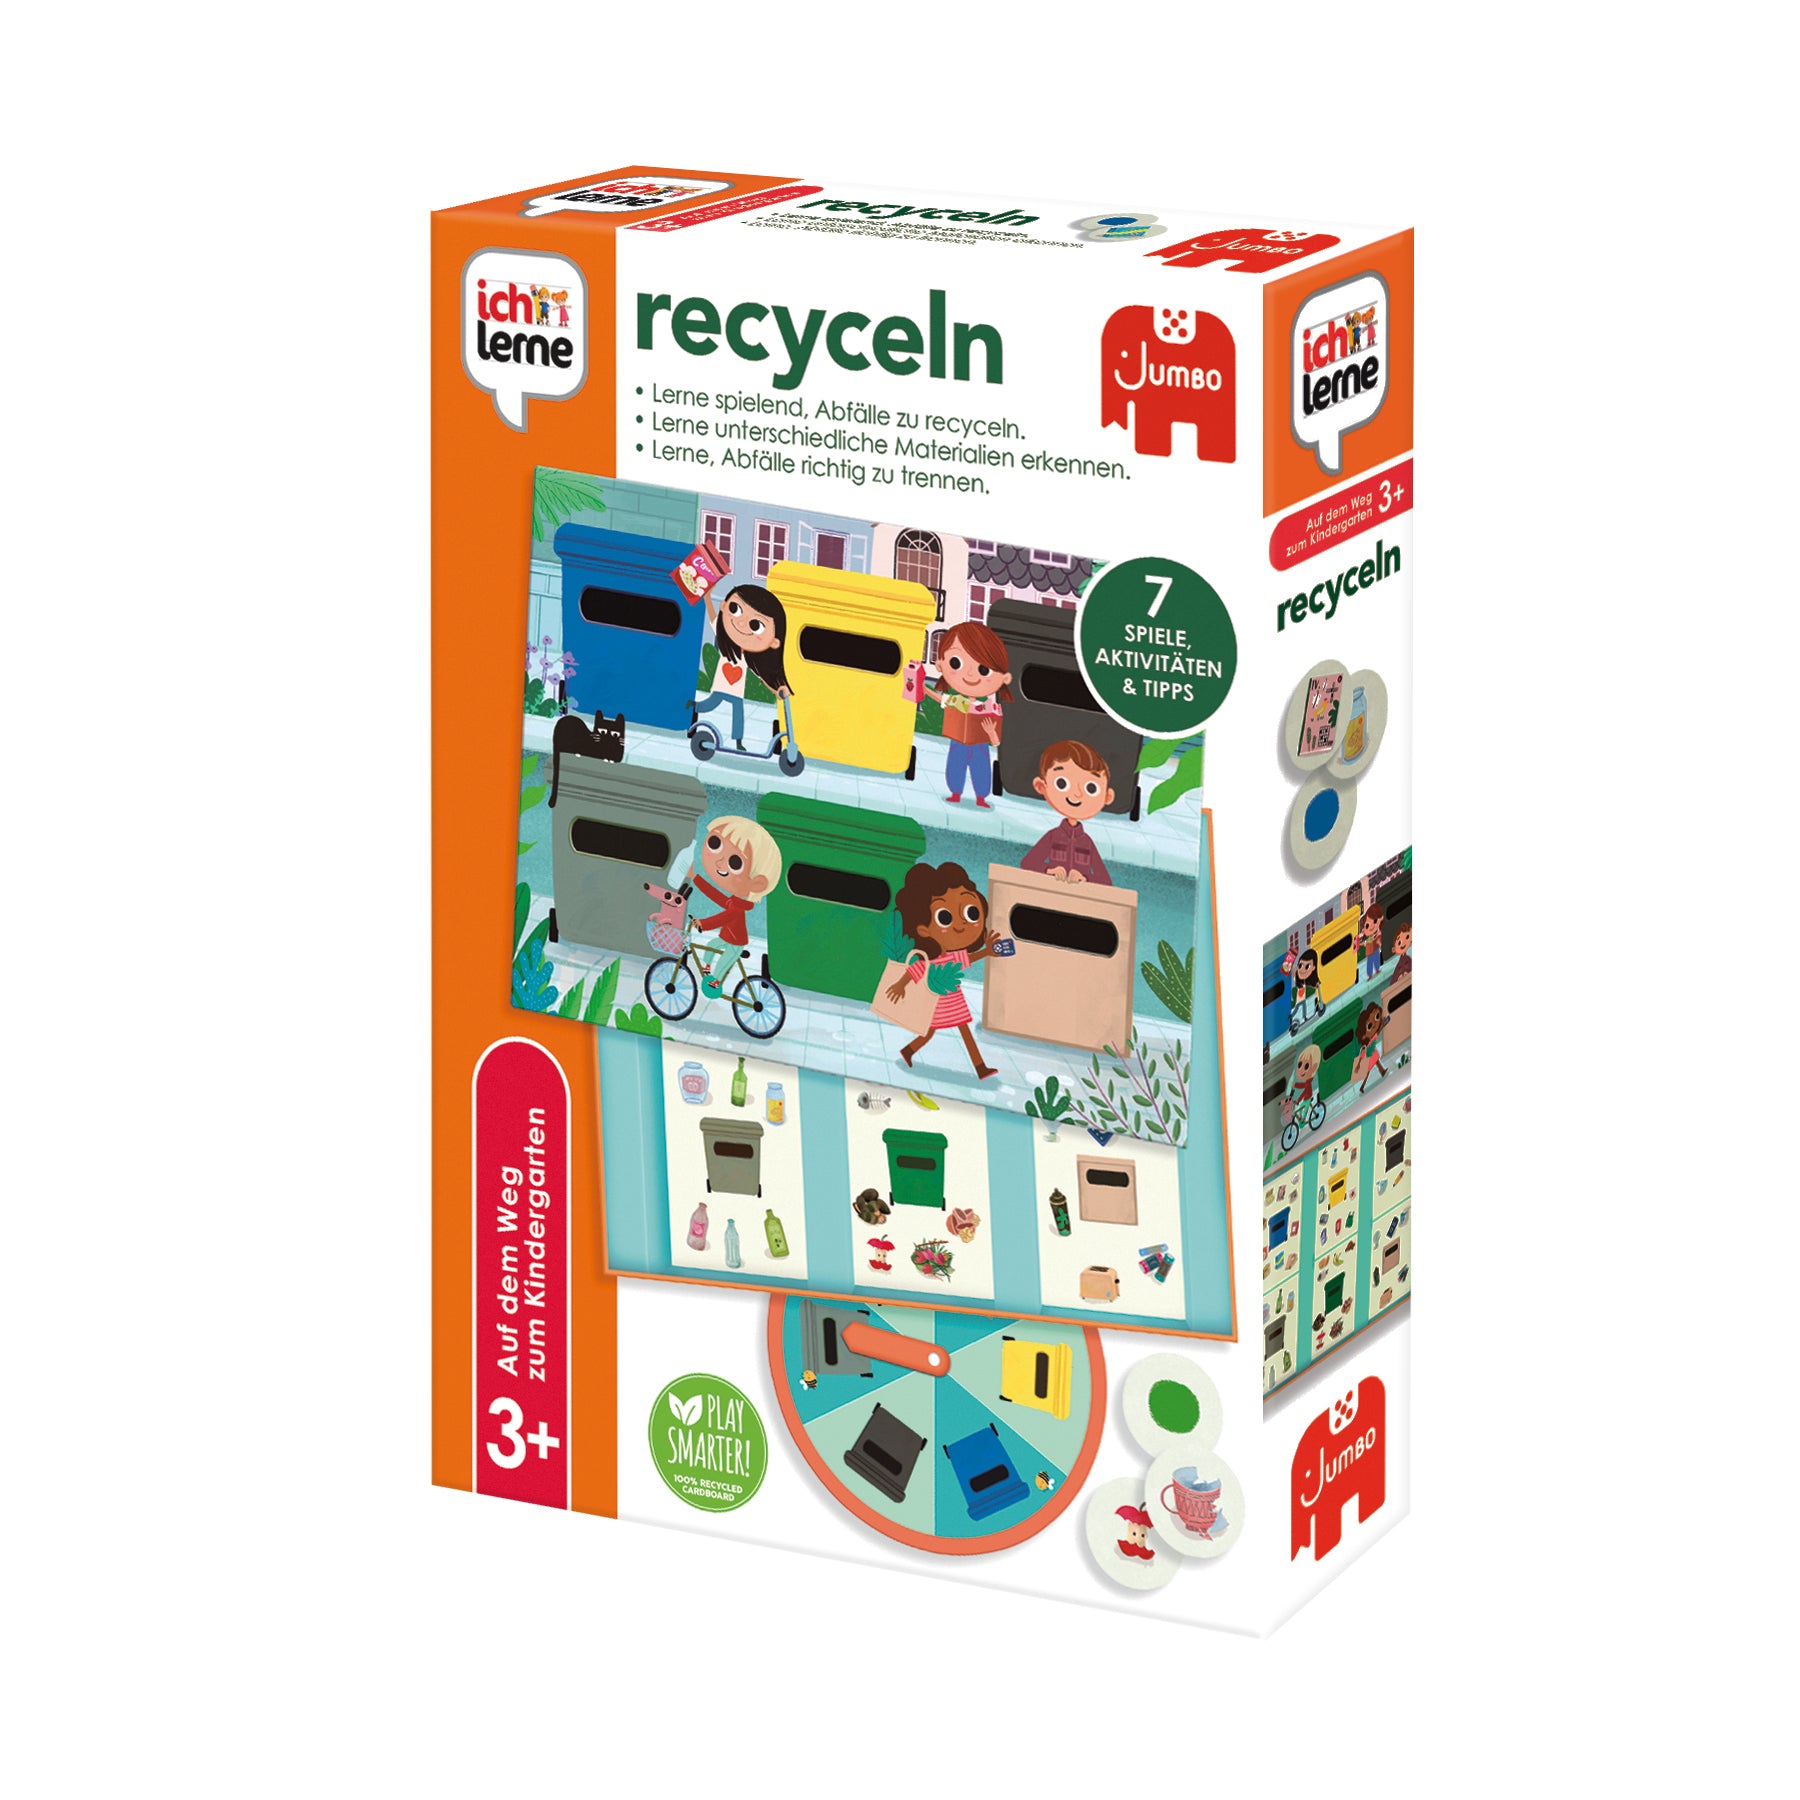 Recycling - Ich lerne - product image - Jumboplay.com